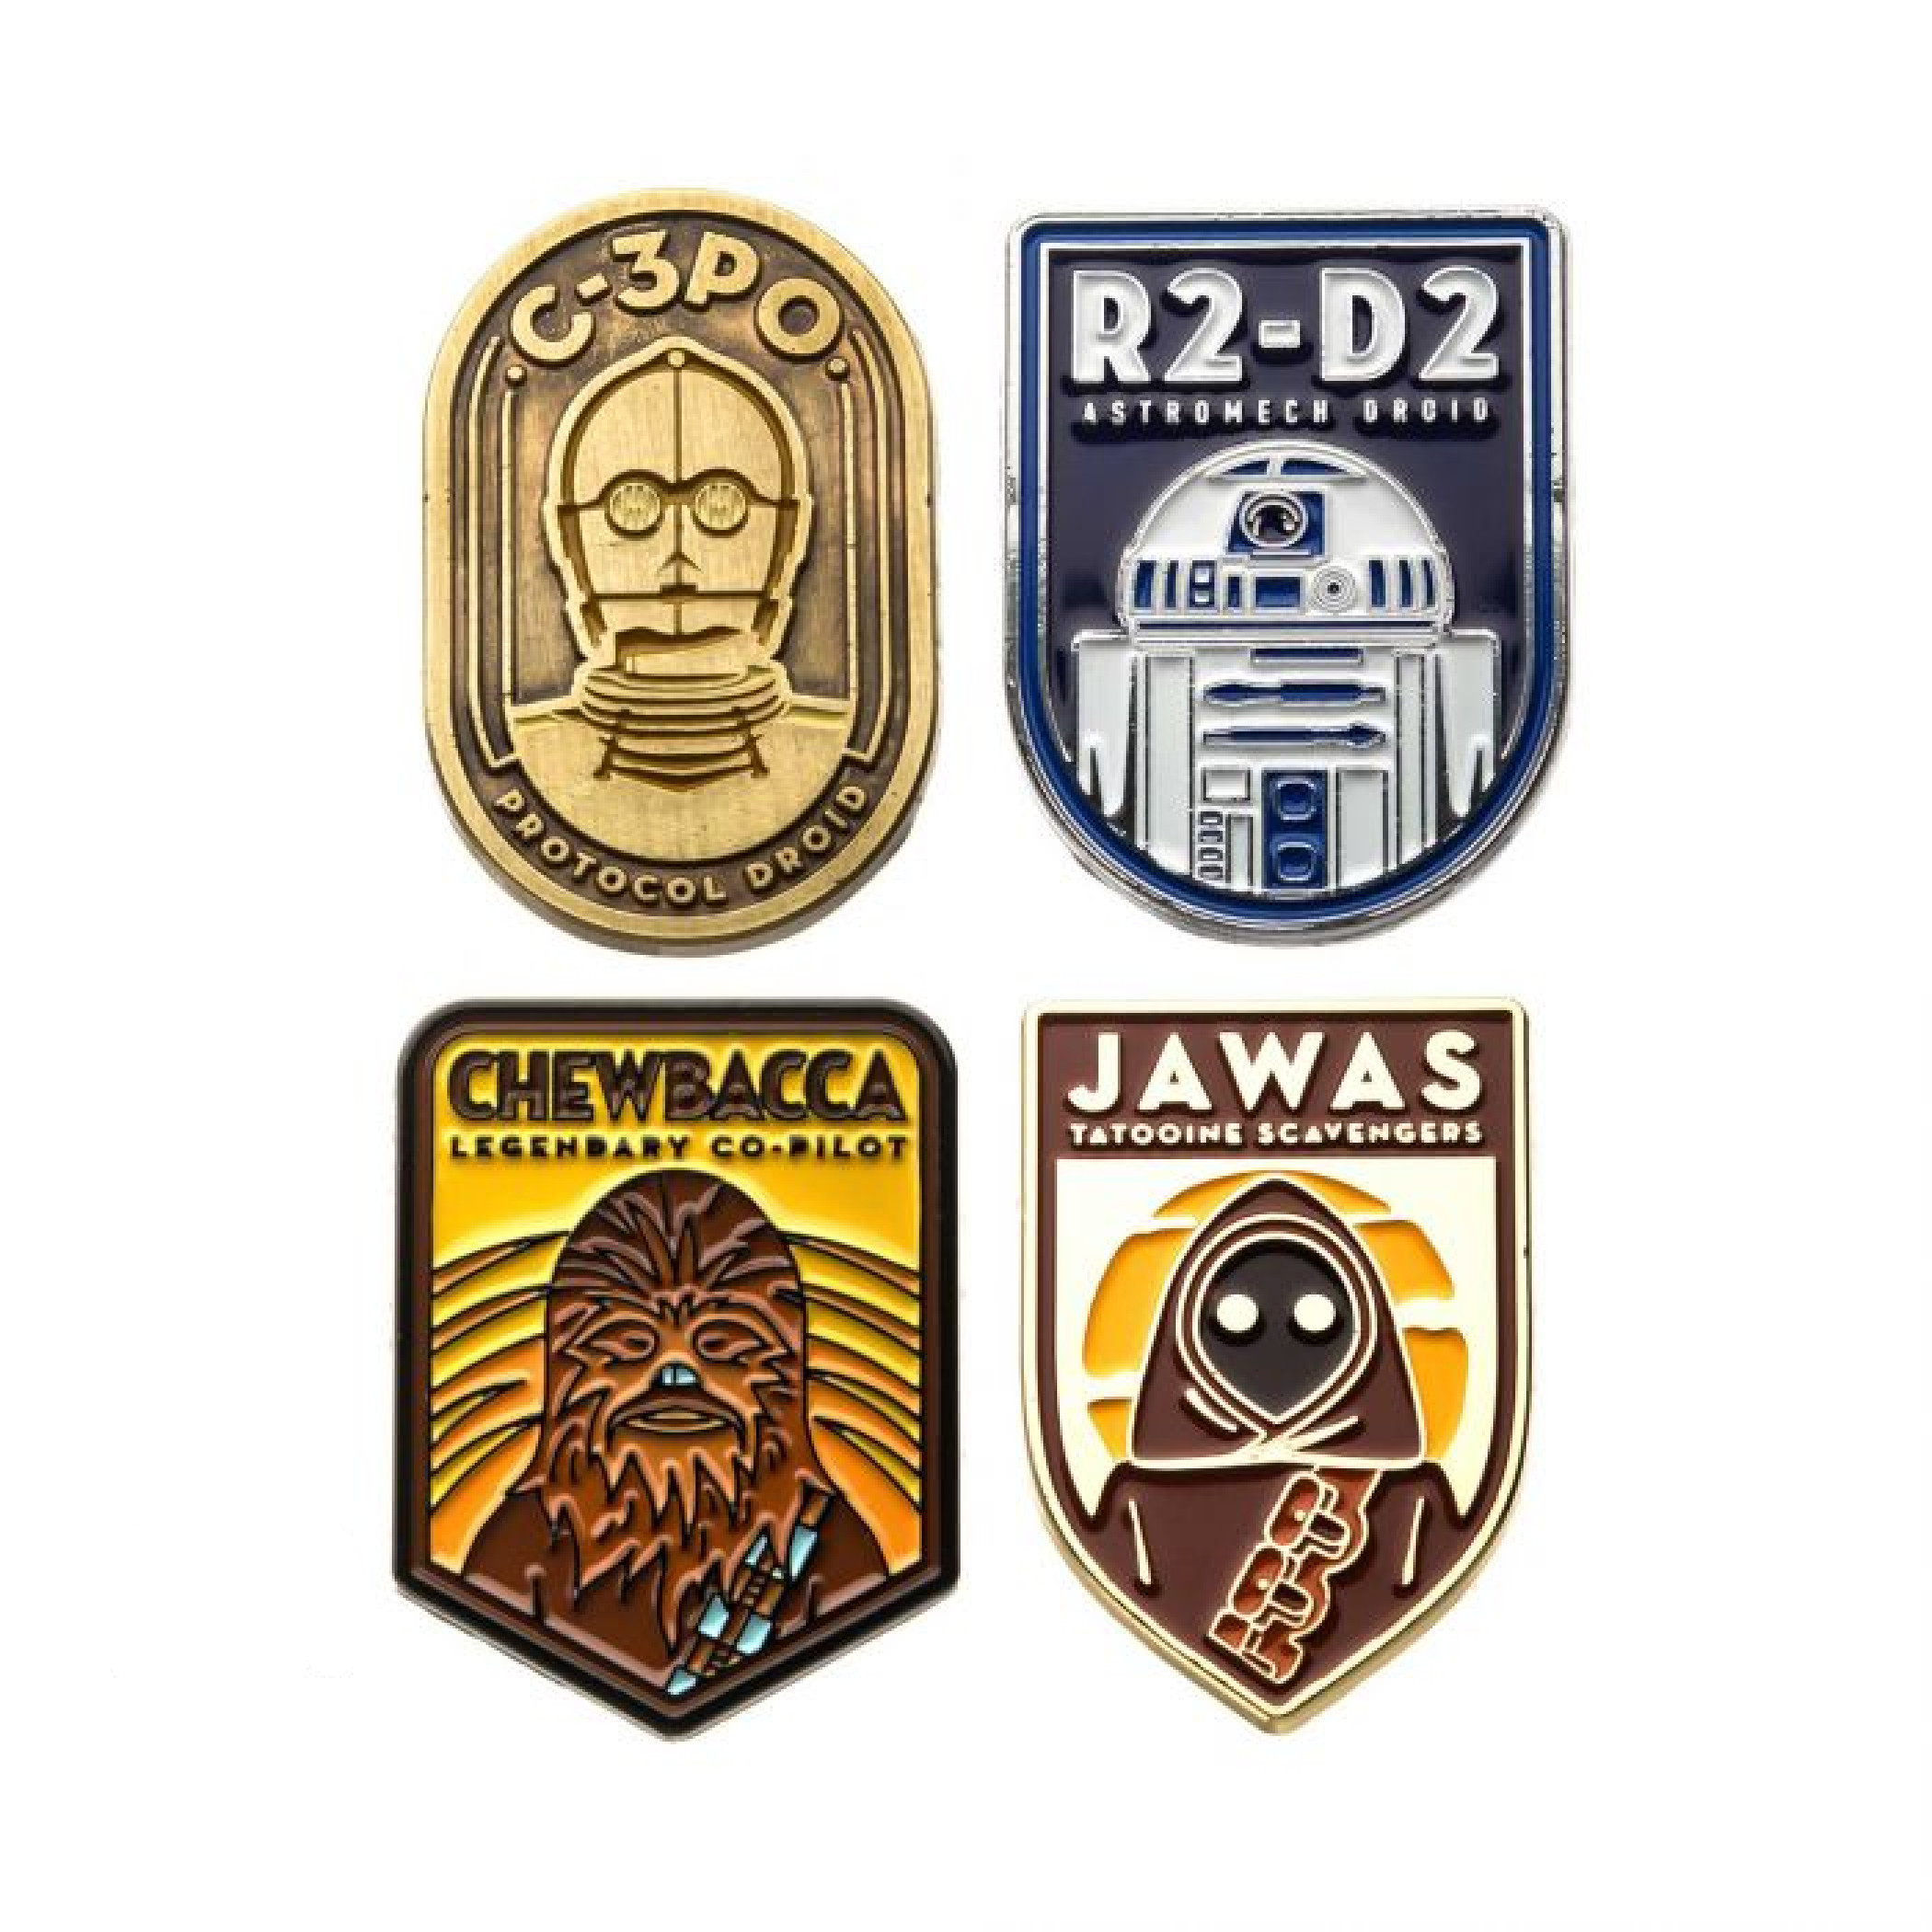 Star Wars R2-D2, C-3PO, Chewbacca, and Jawas Lapel Pin Set